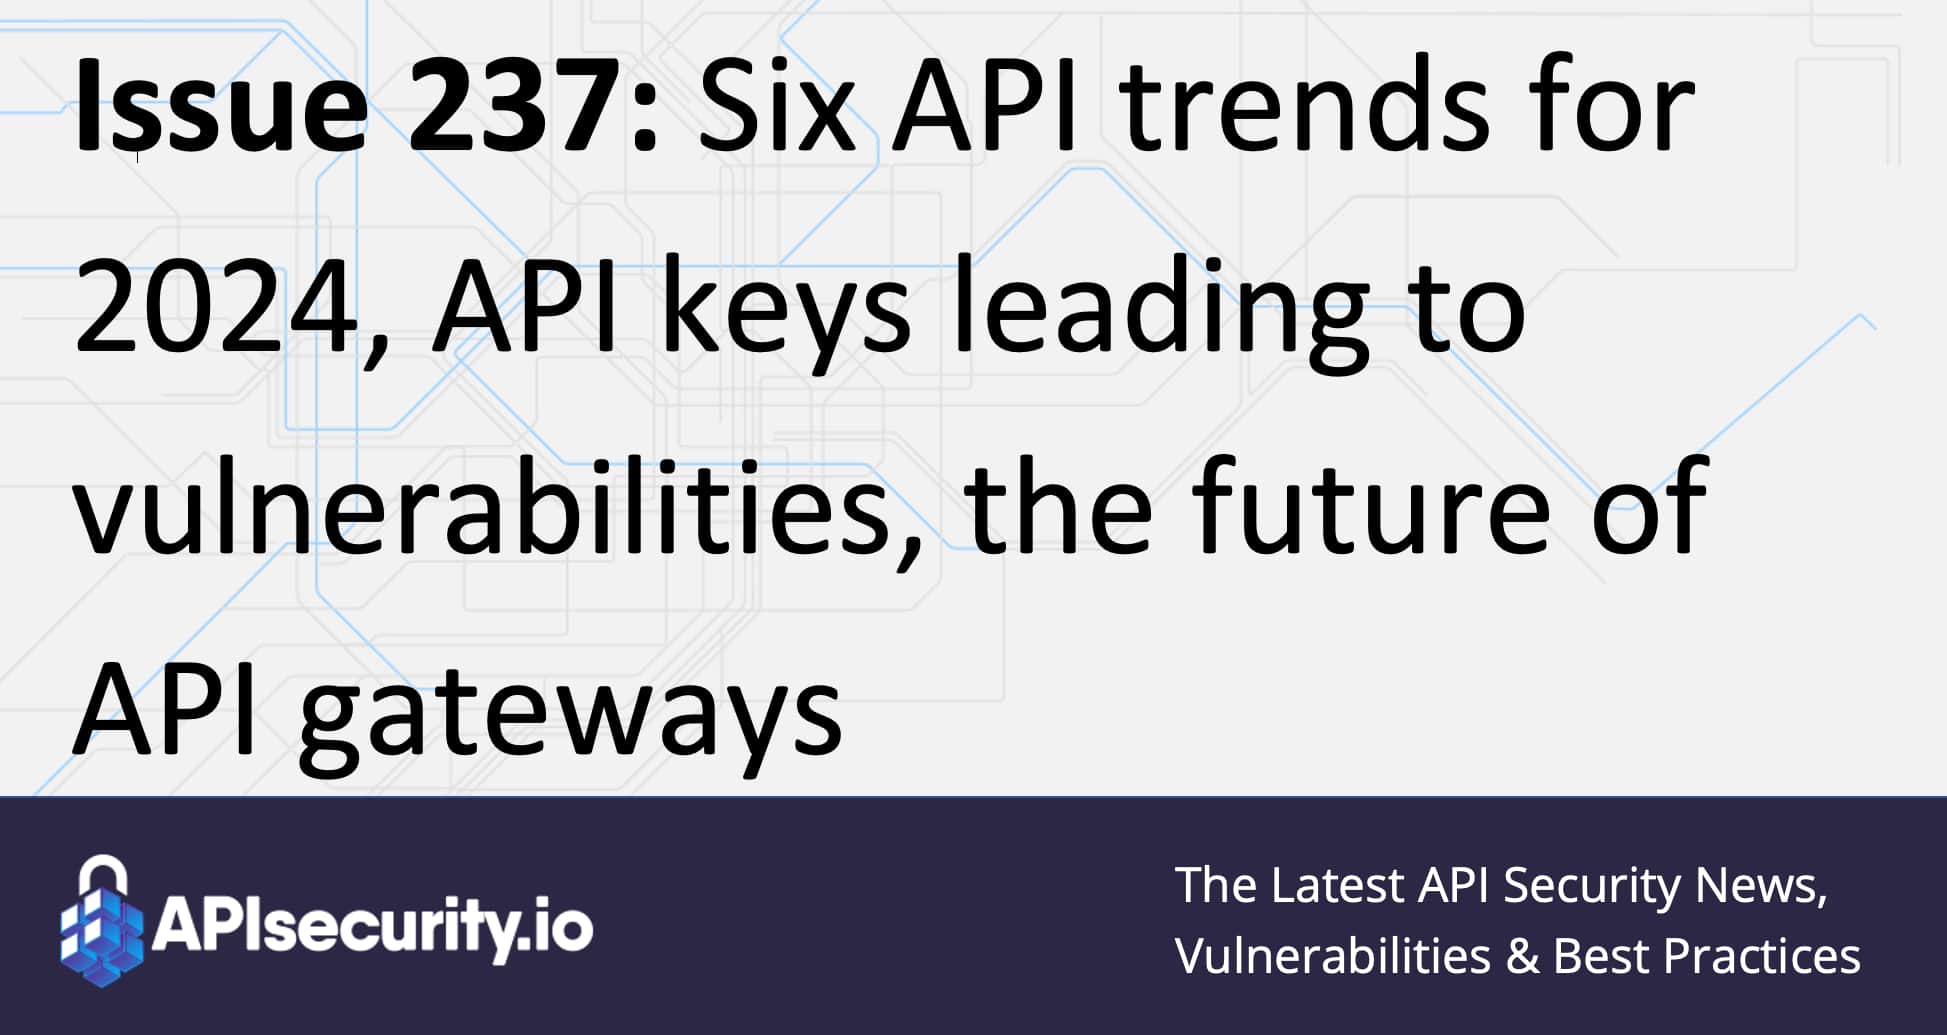 Issue 237 Six API trends for 2024, API keys leading to vulnerabilities